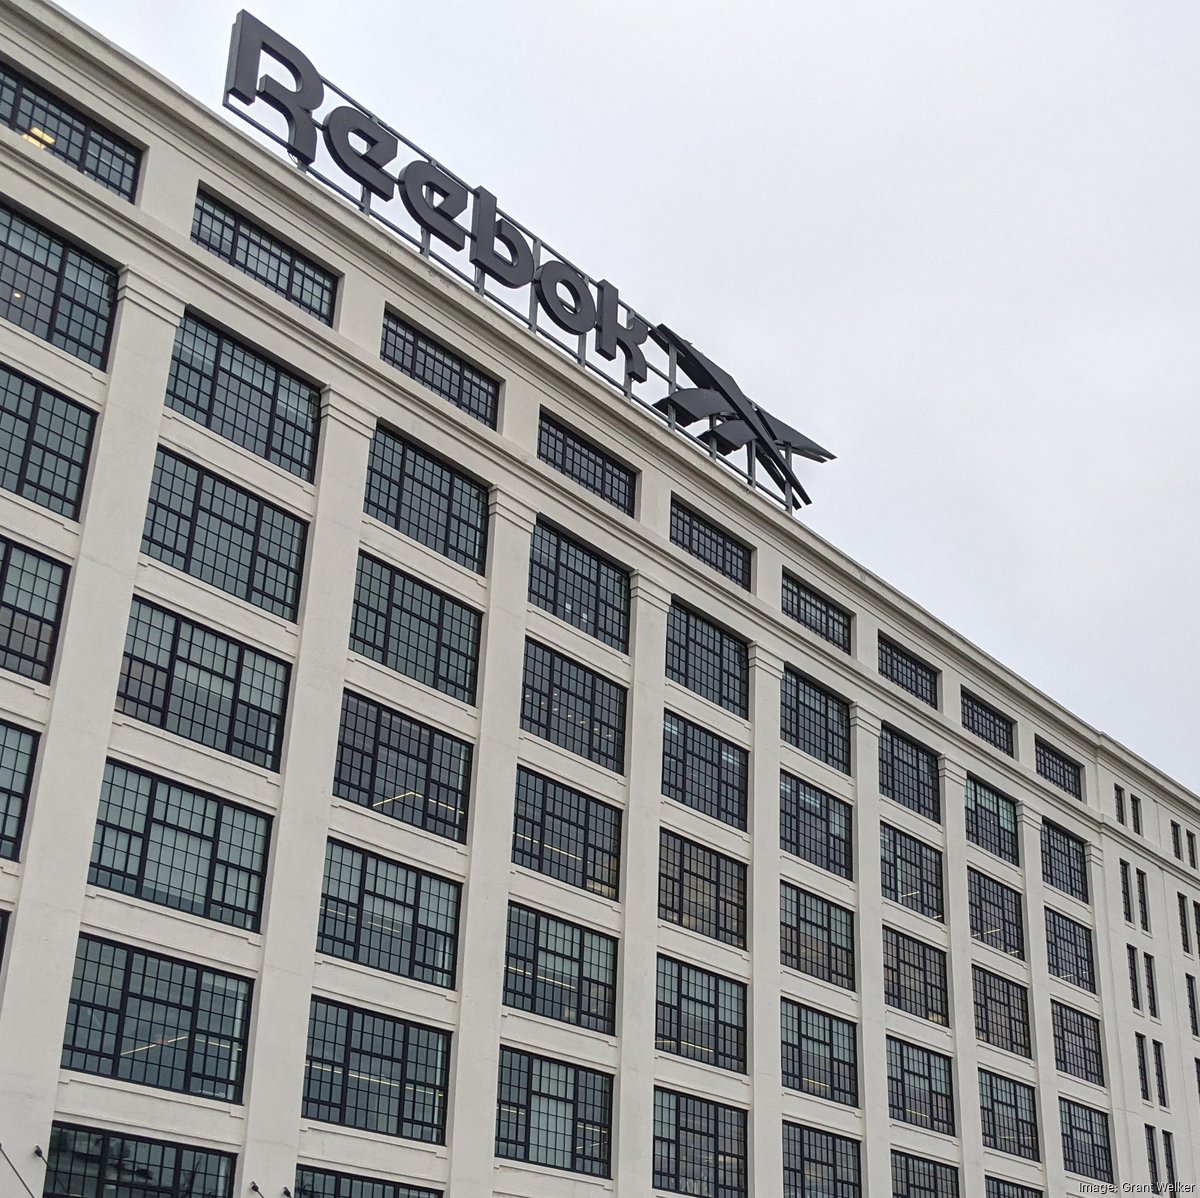 Adidas To Sell Reebok To Authentic Brands For $2.5B